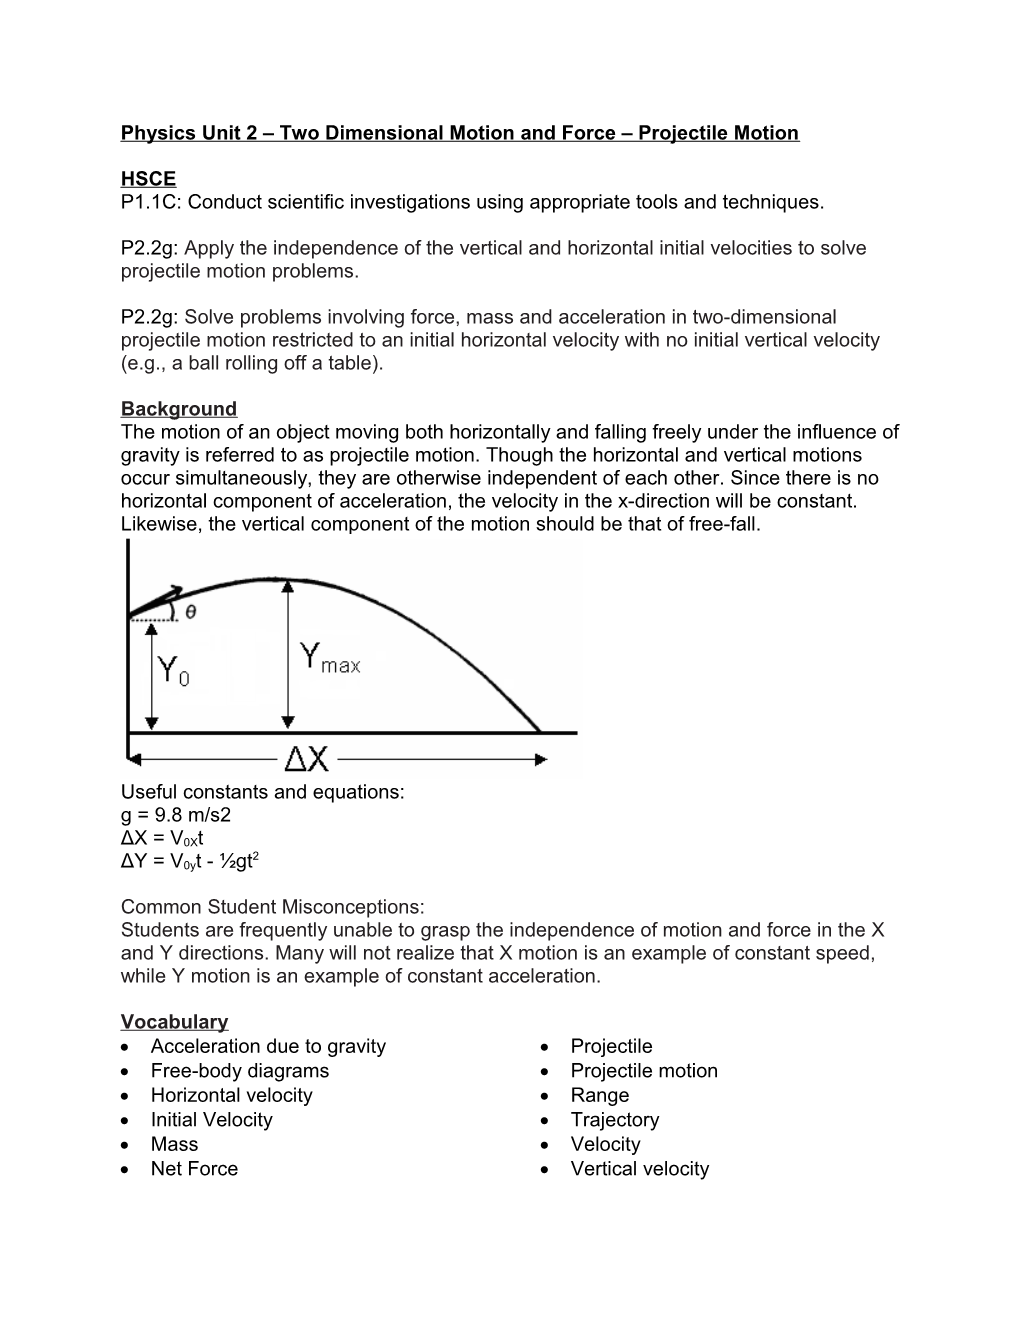 Physics Unit 2 Two Dimensional Motion and Force Projectile Motion